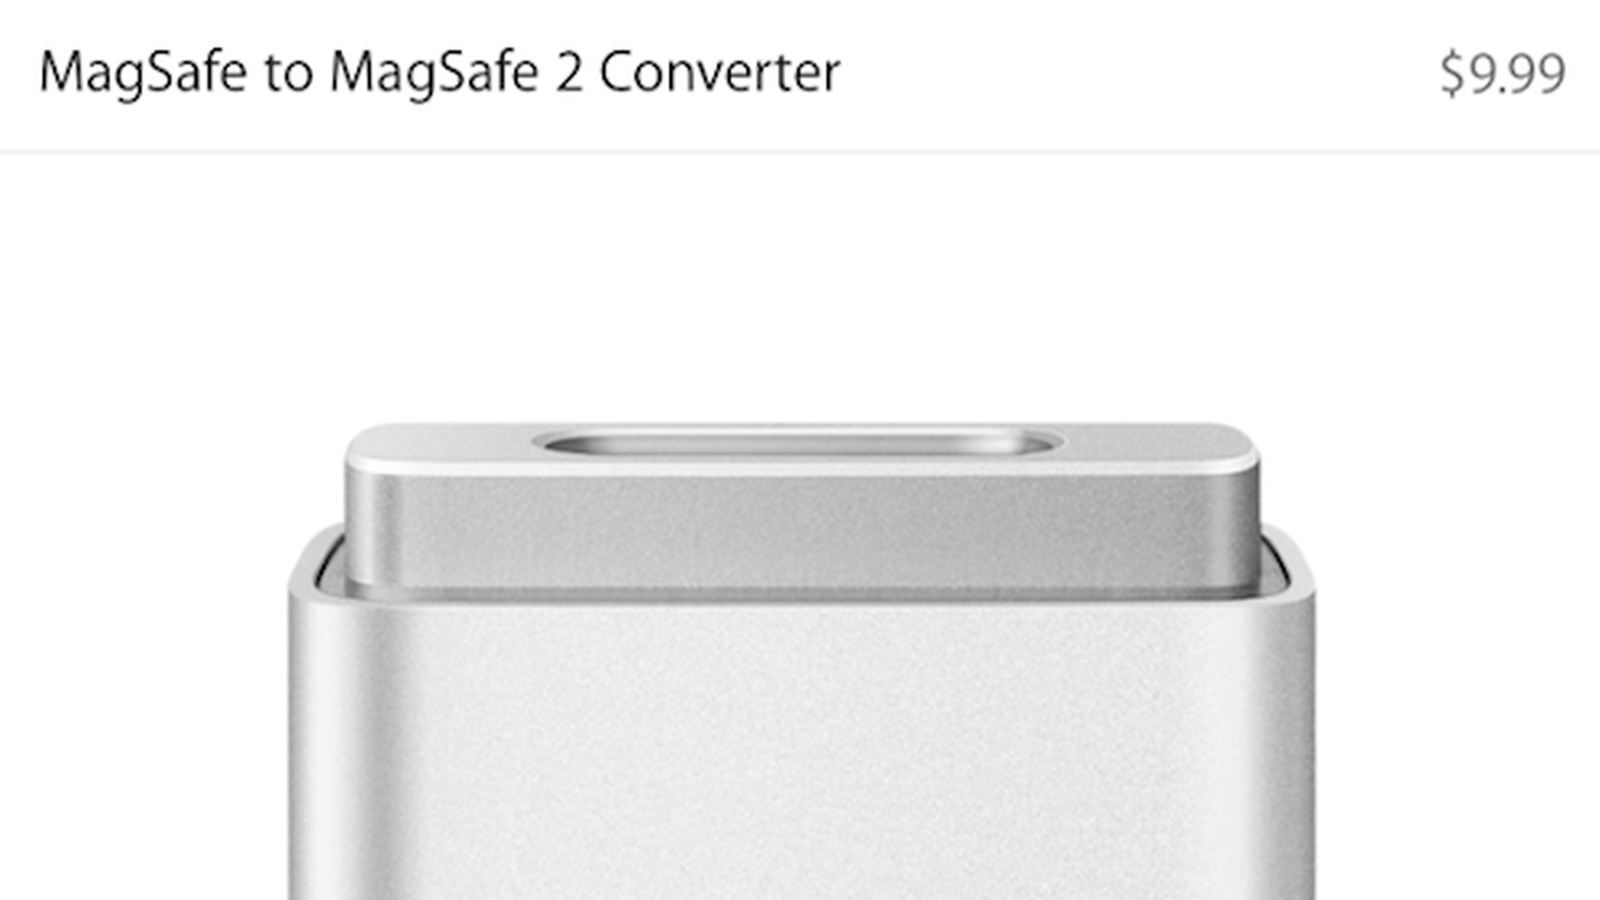 Store Listing MagSafe to MagSafe as Discontinued - MacRumors